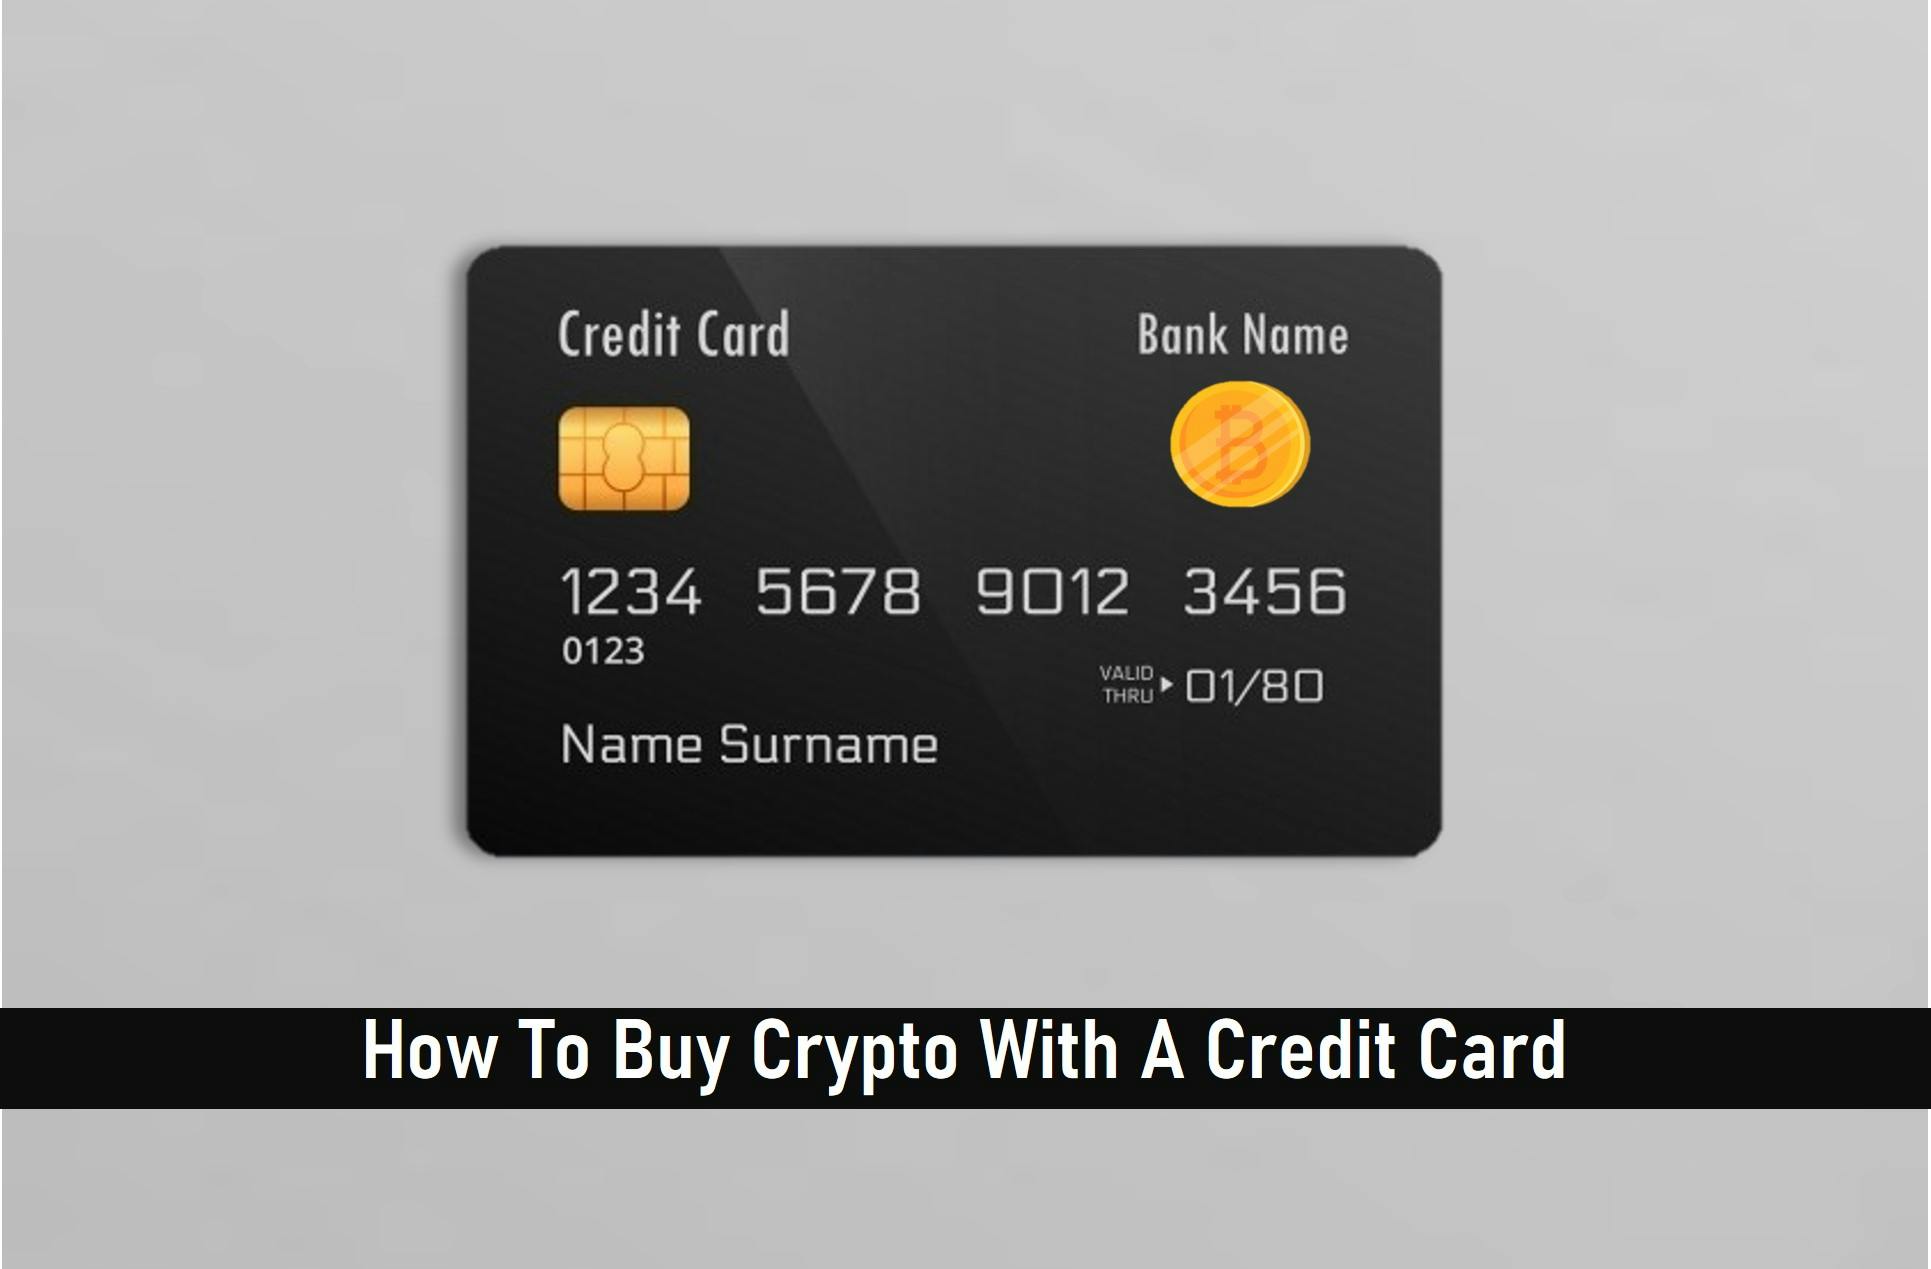 How To Buy Crypto With A Credit Card